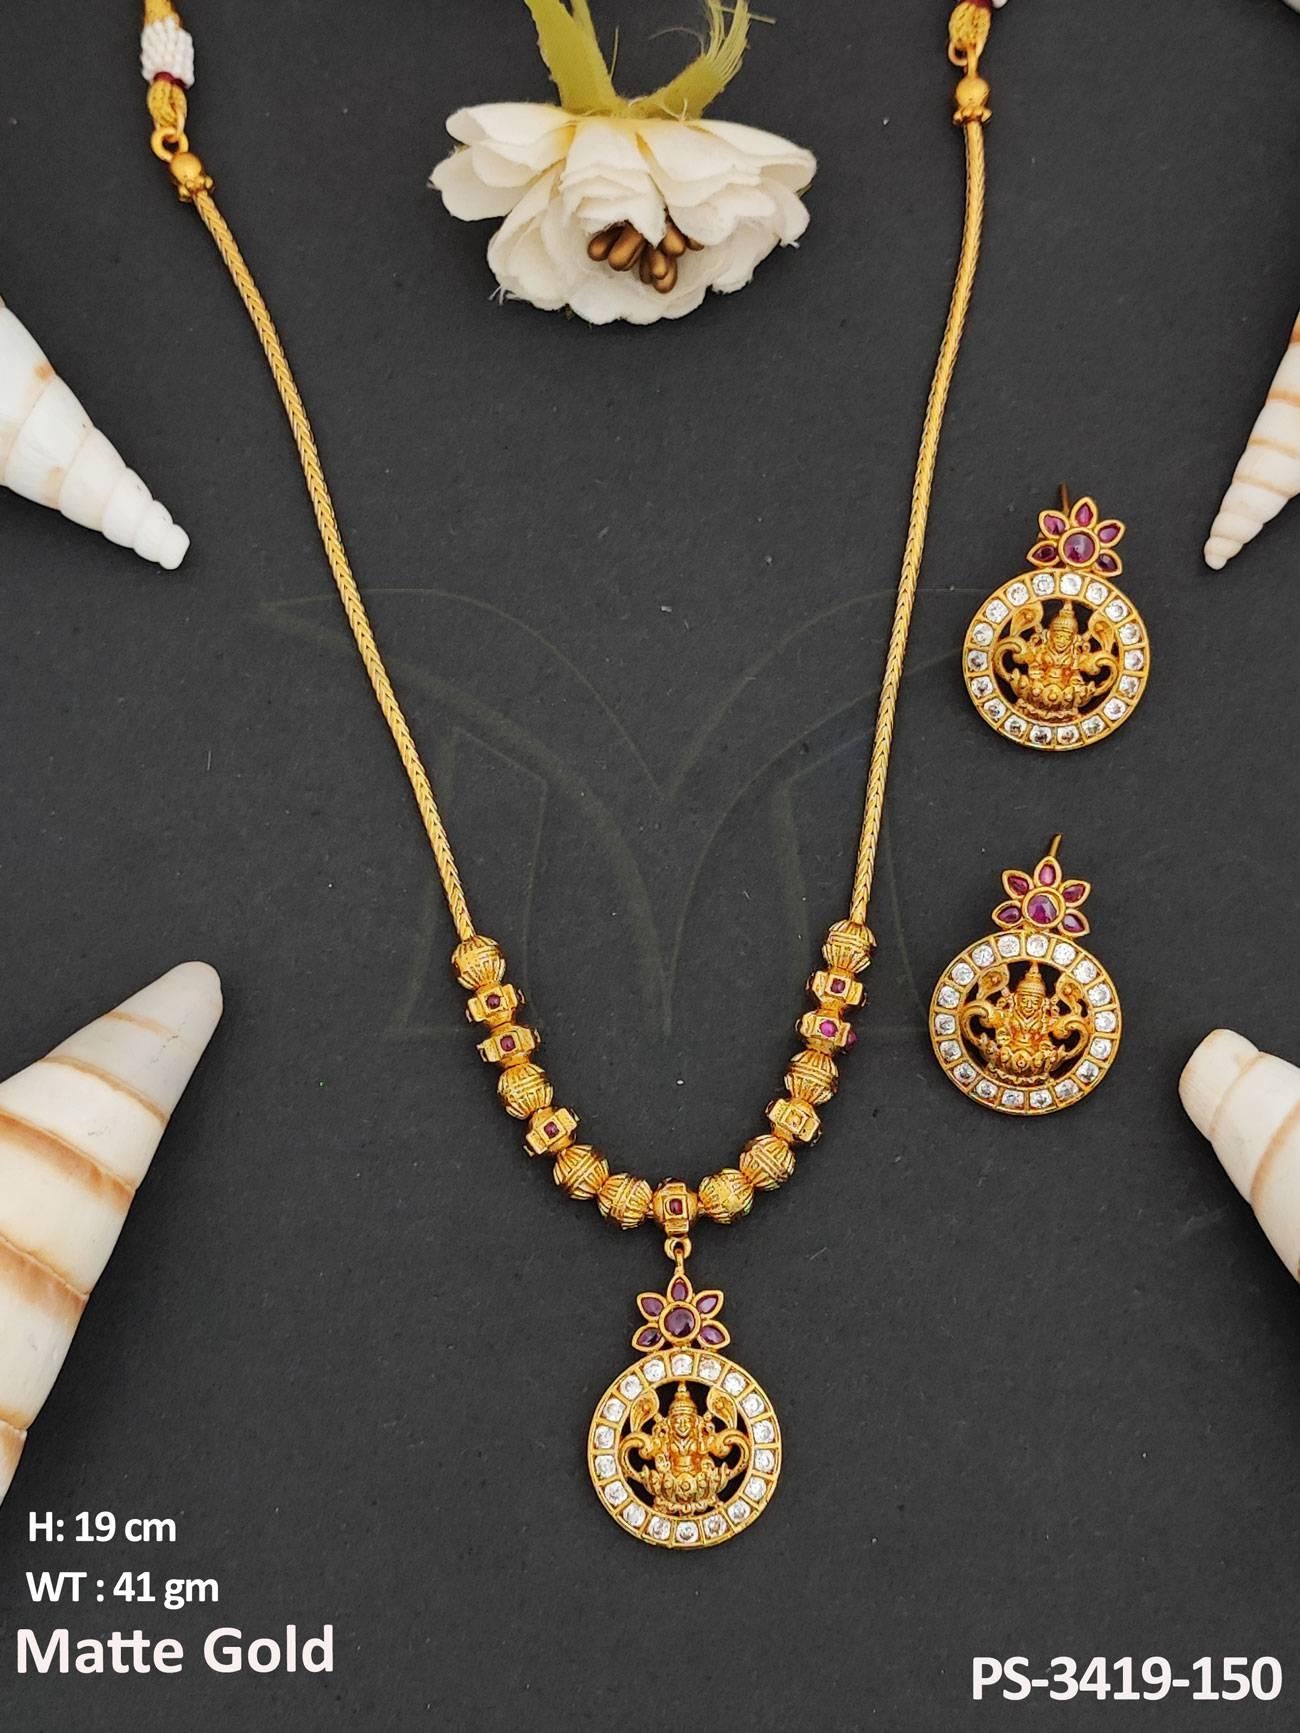 Enjoy the intricate detail and long-lasting craftsmanship of this exquisite set.